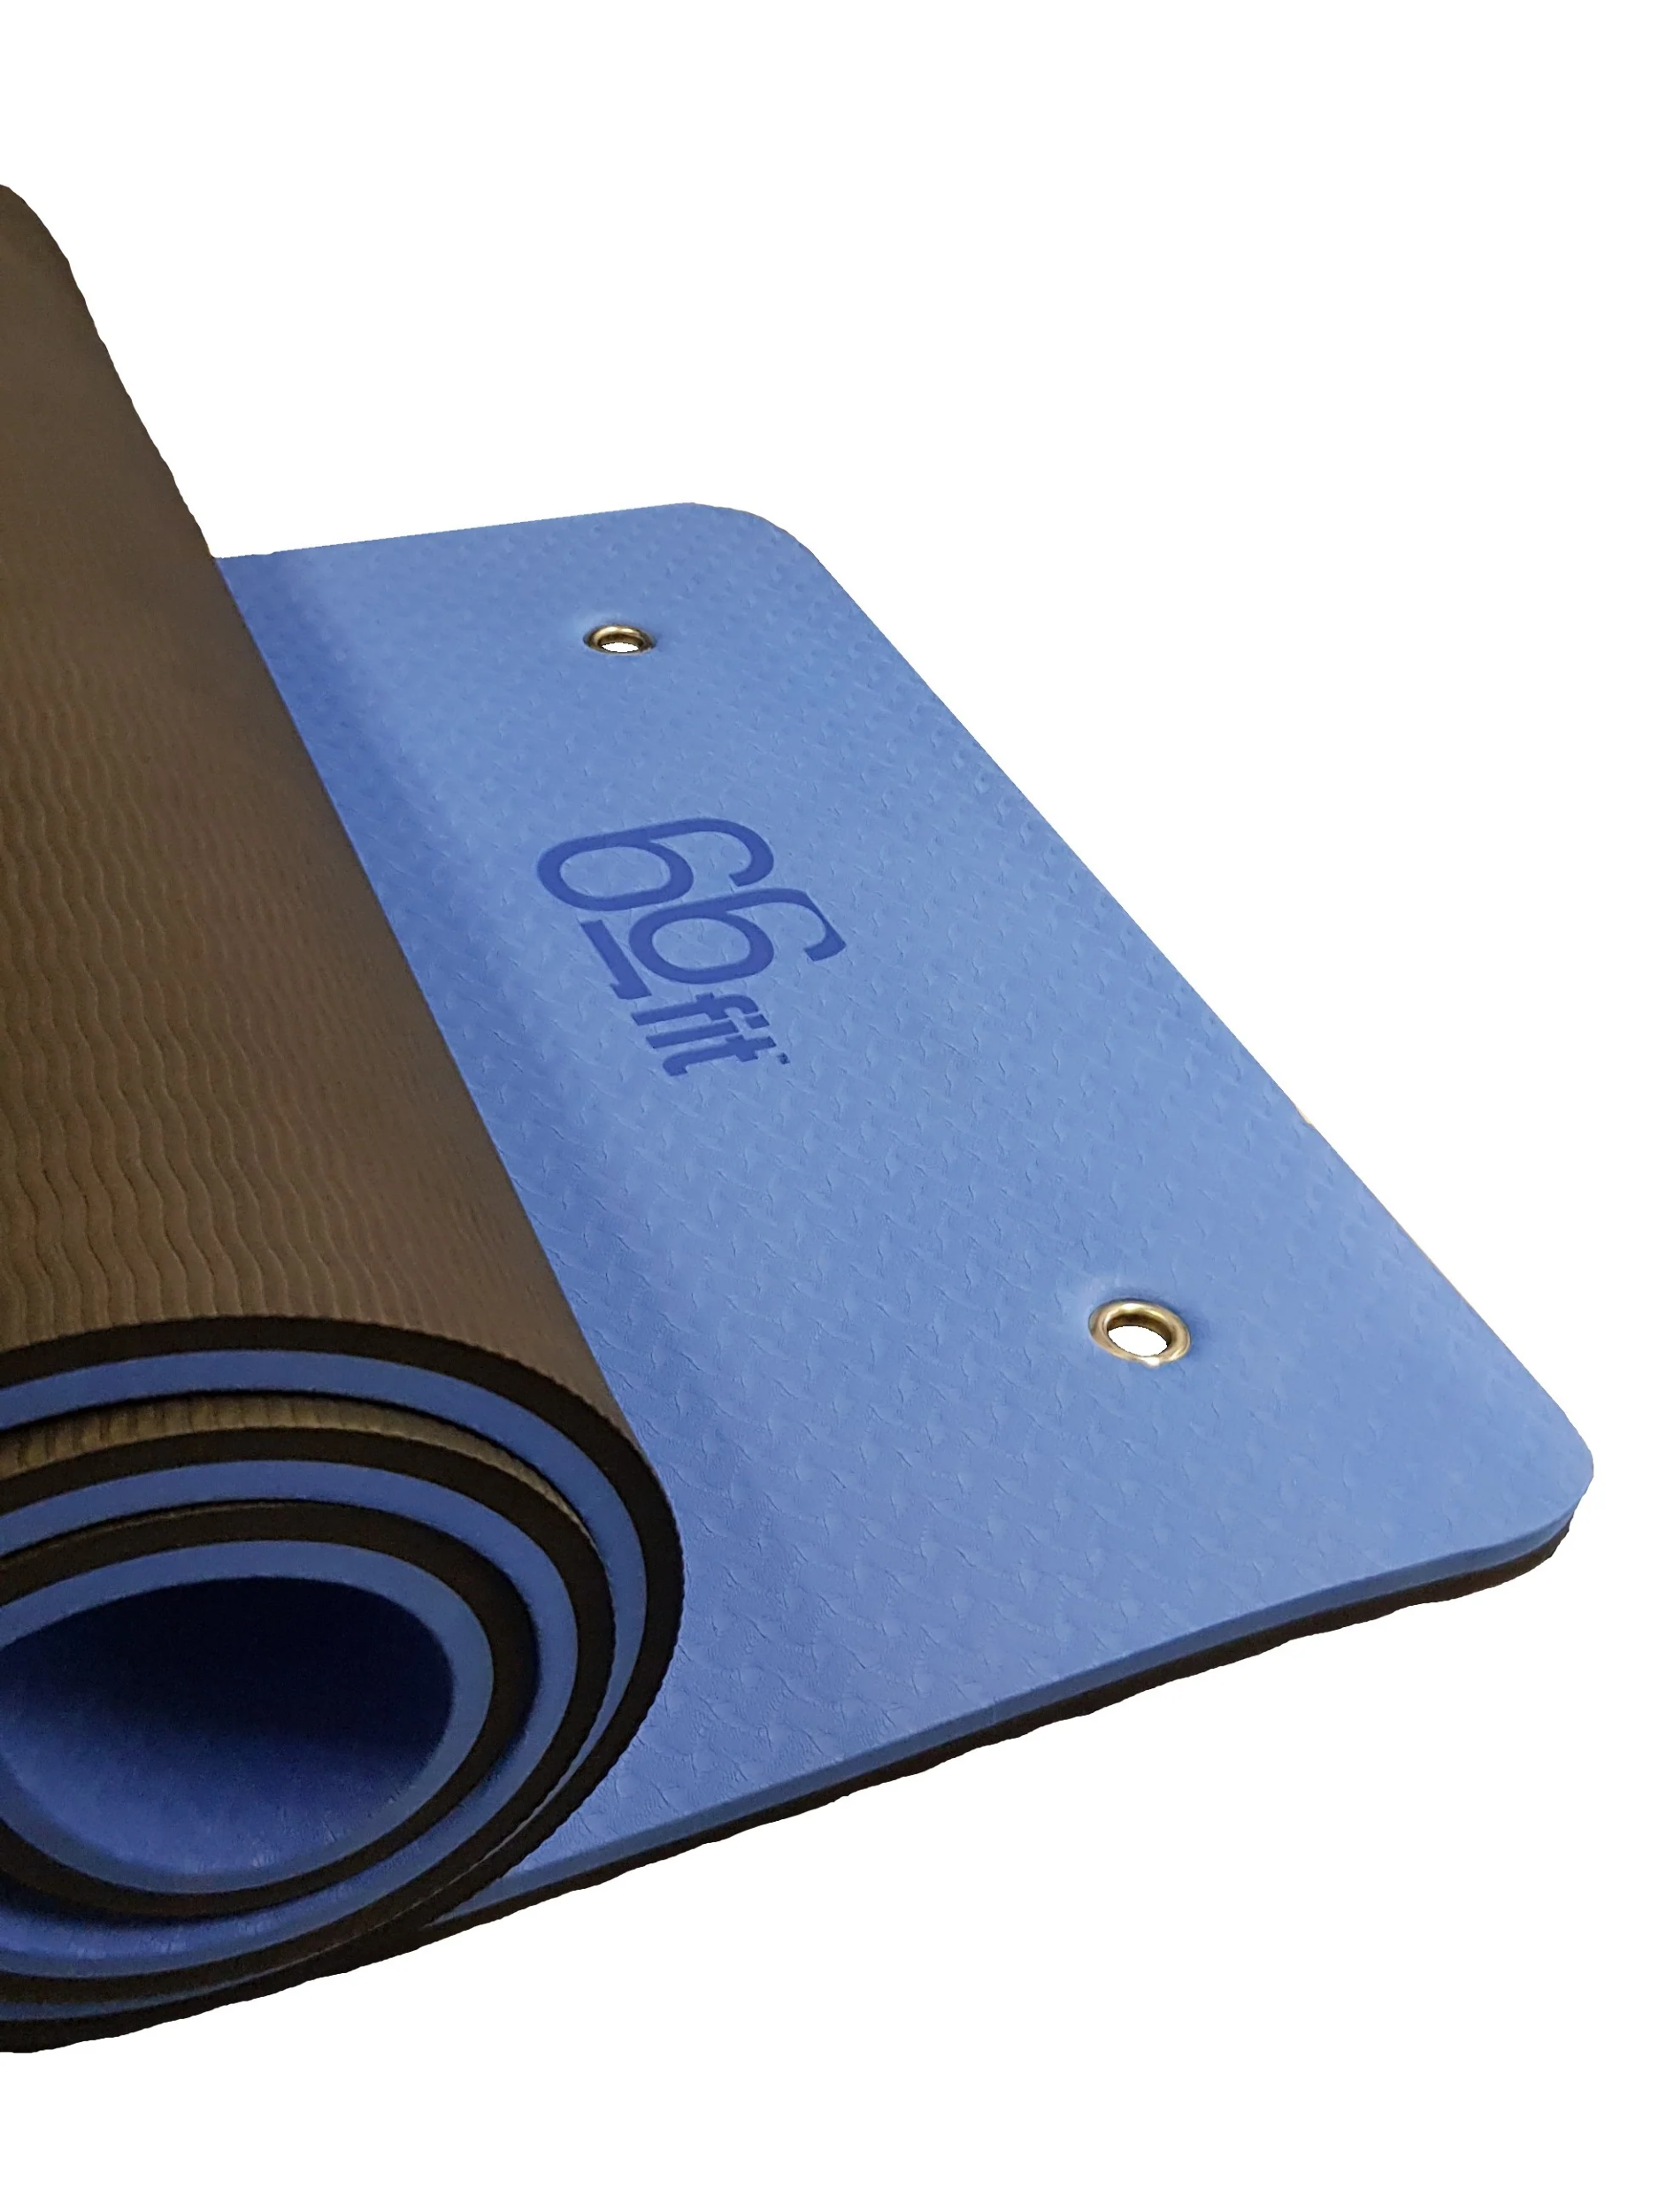 professional exercise mat